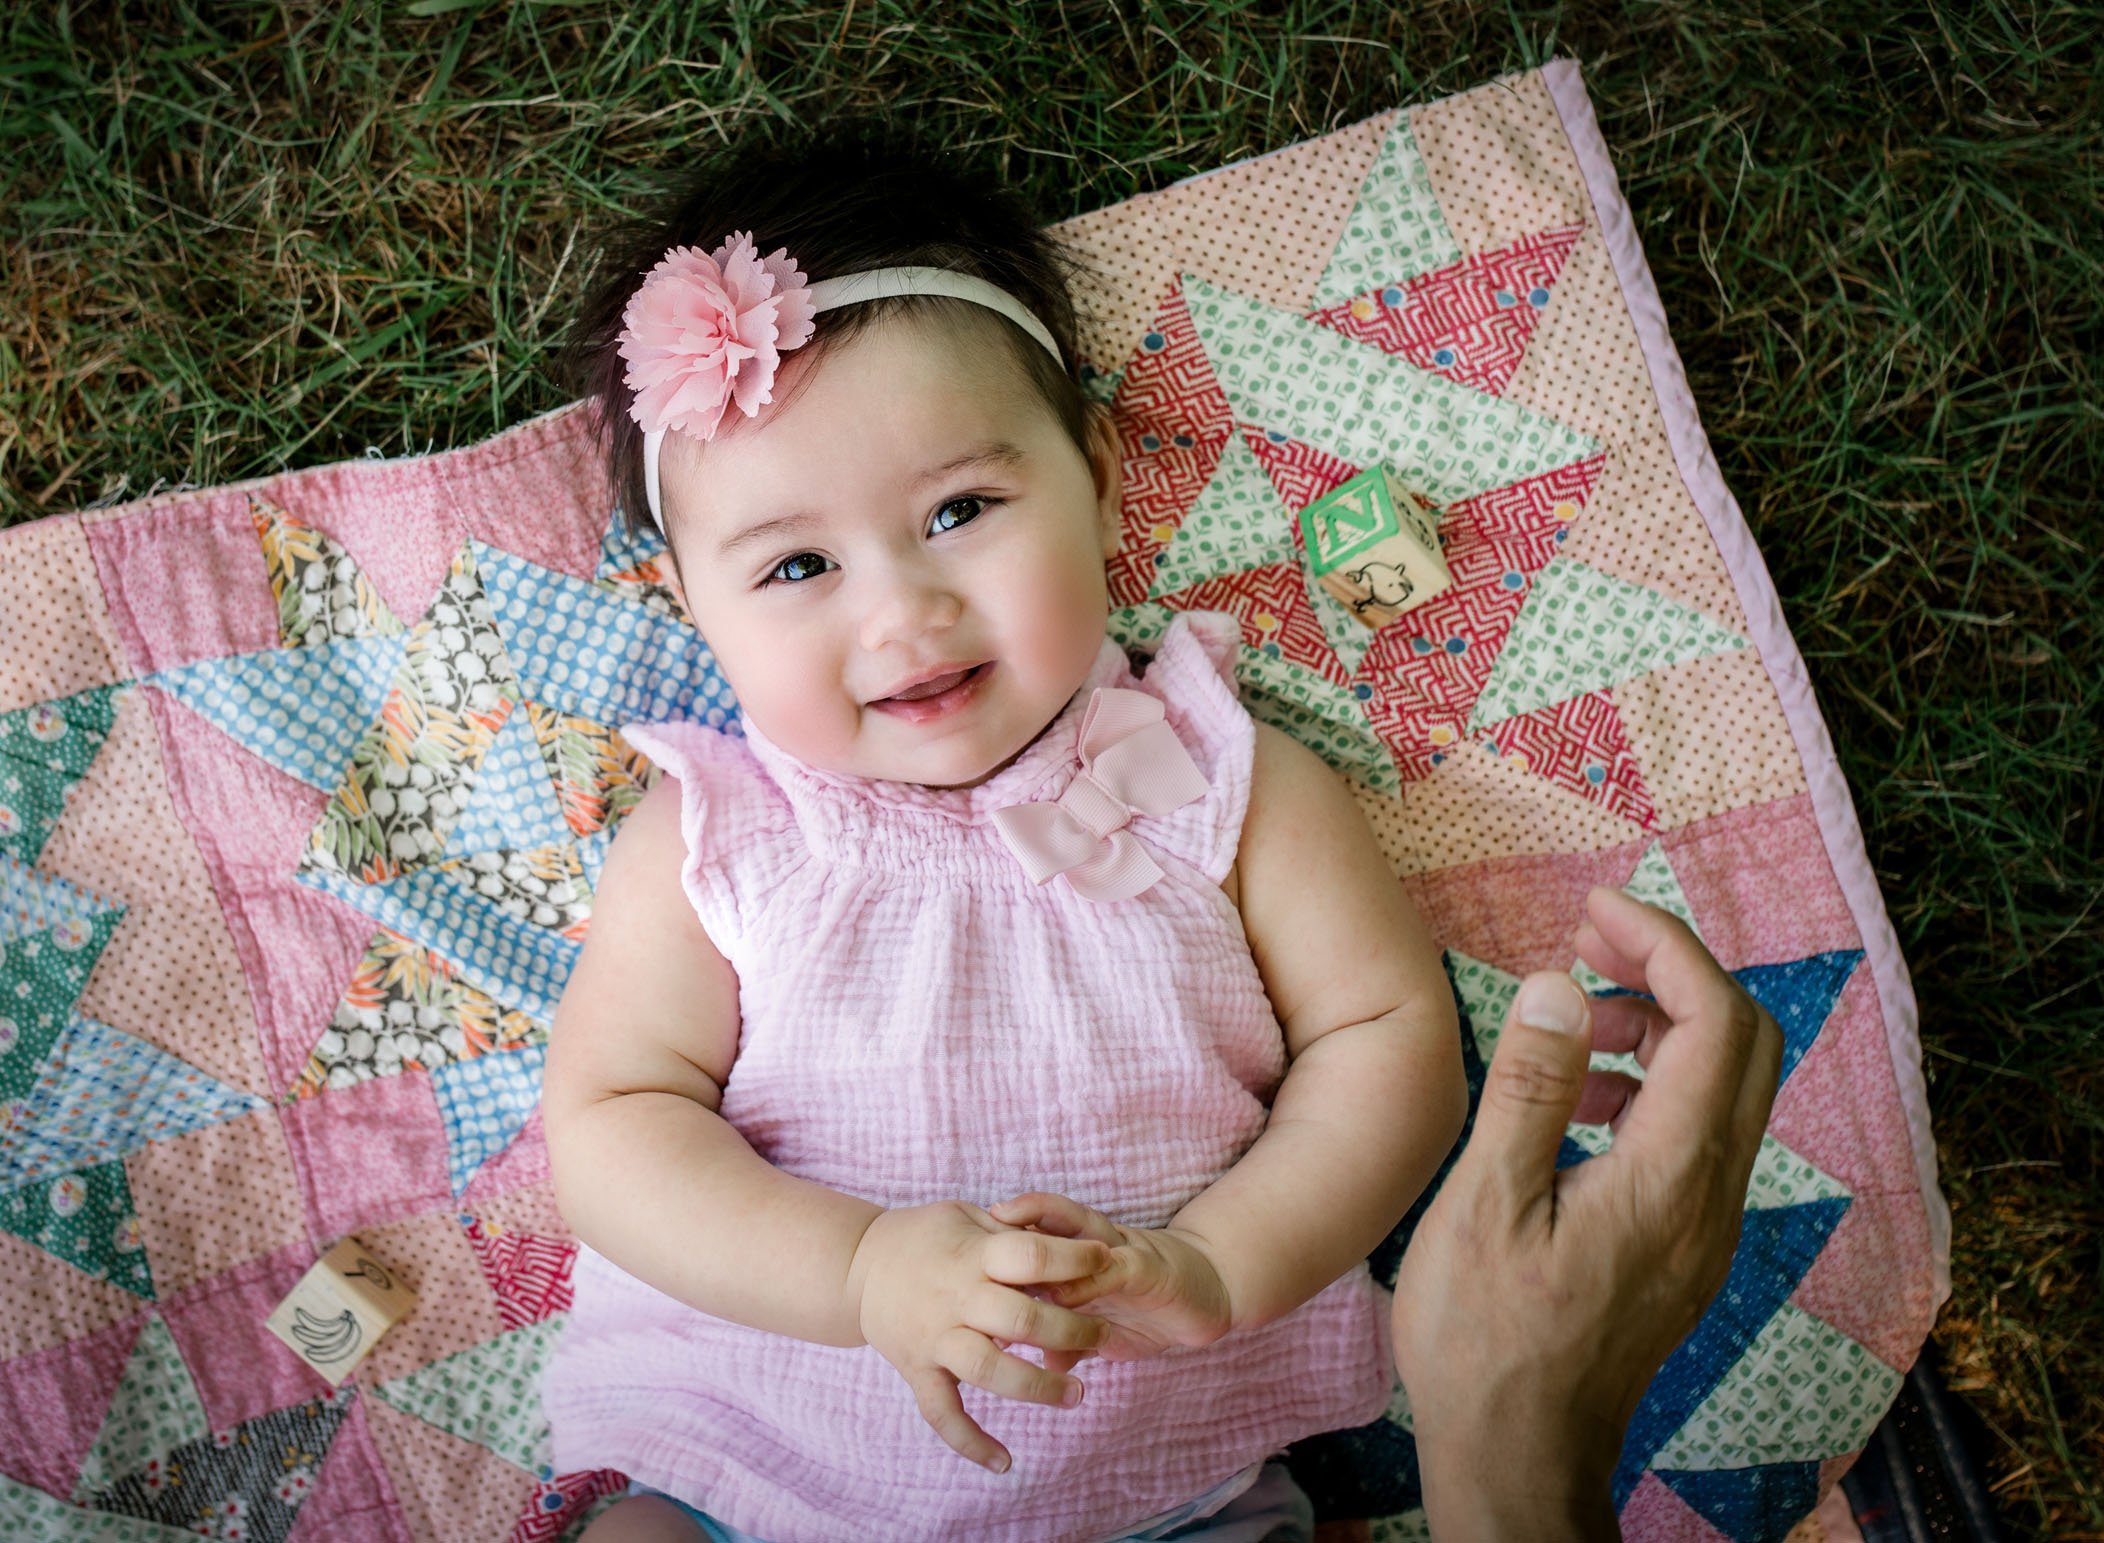 6 month old baby girl lying on her back on a pink quilt on the grass smiling